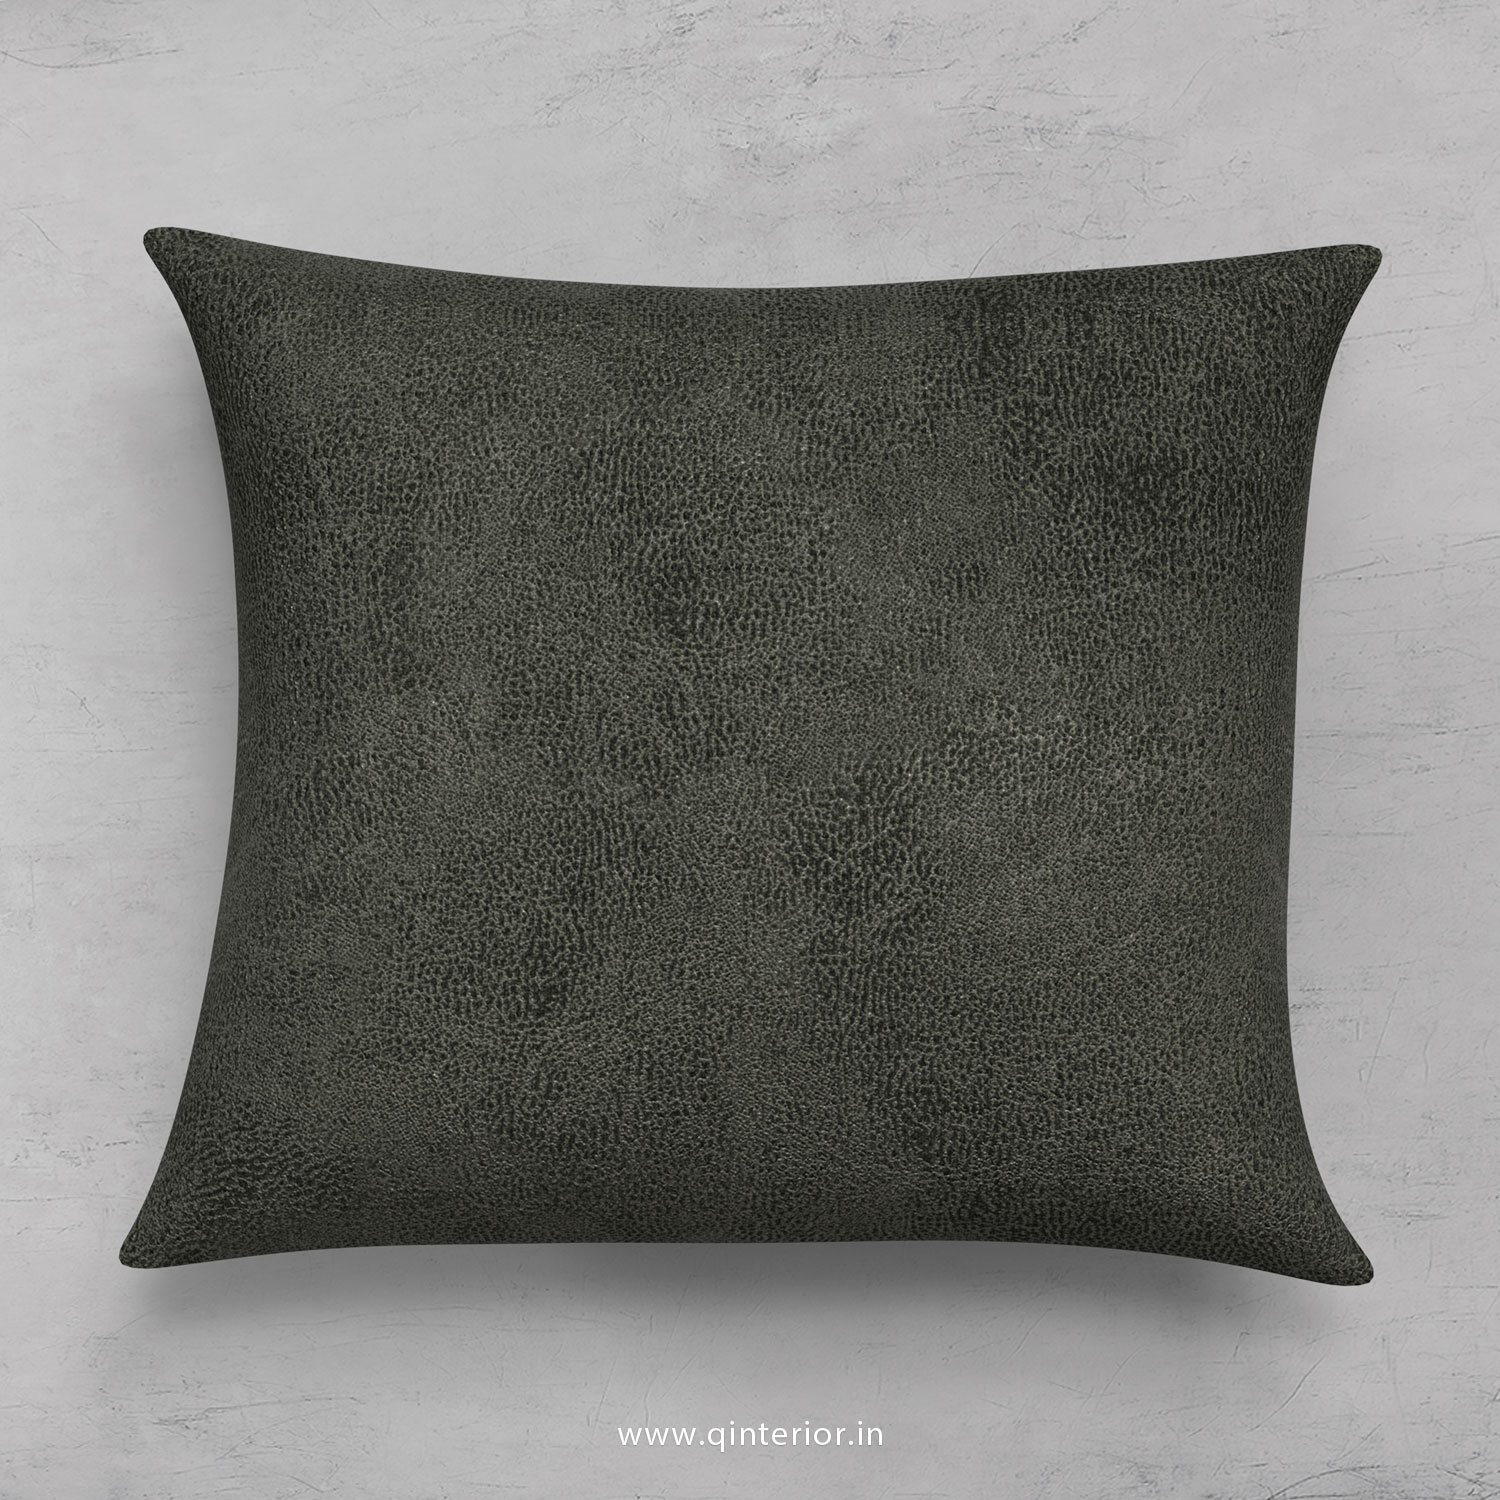 Cushion With Cushion Cover in Fab Leather- CUS001 FL07